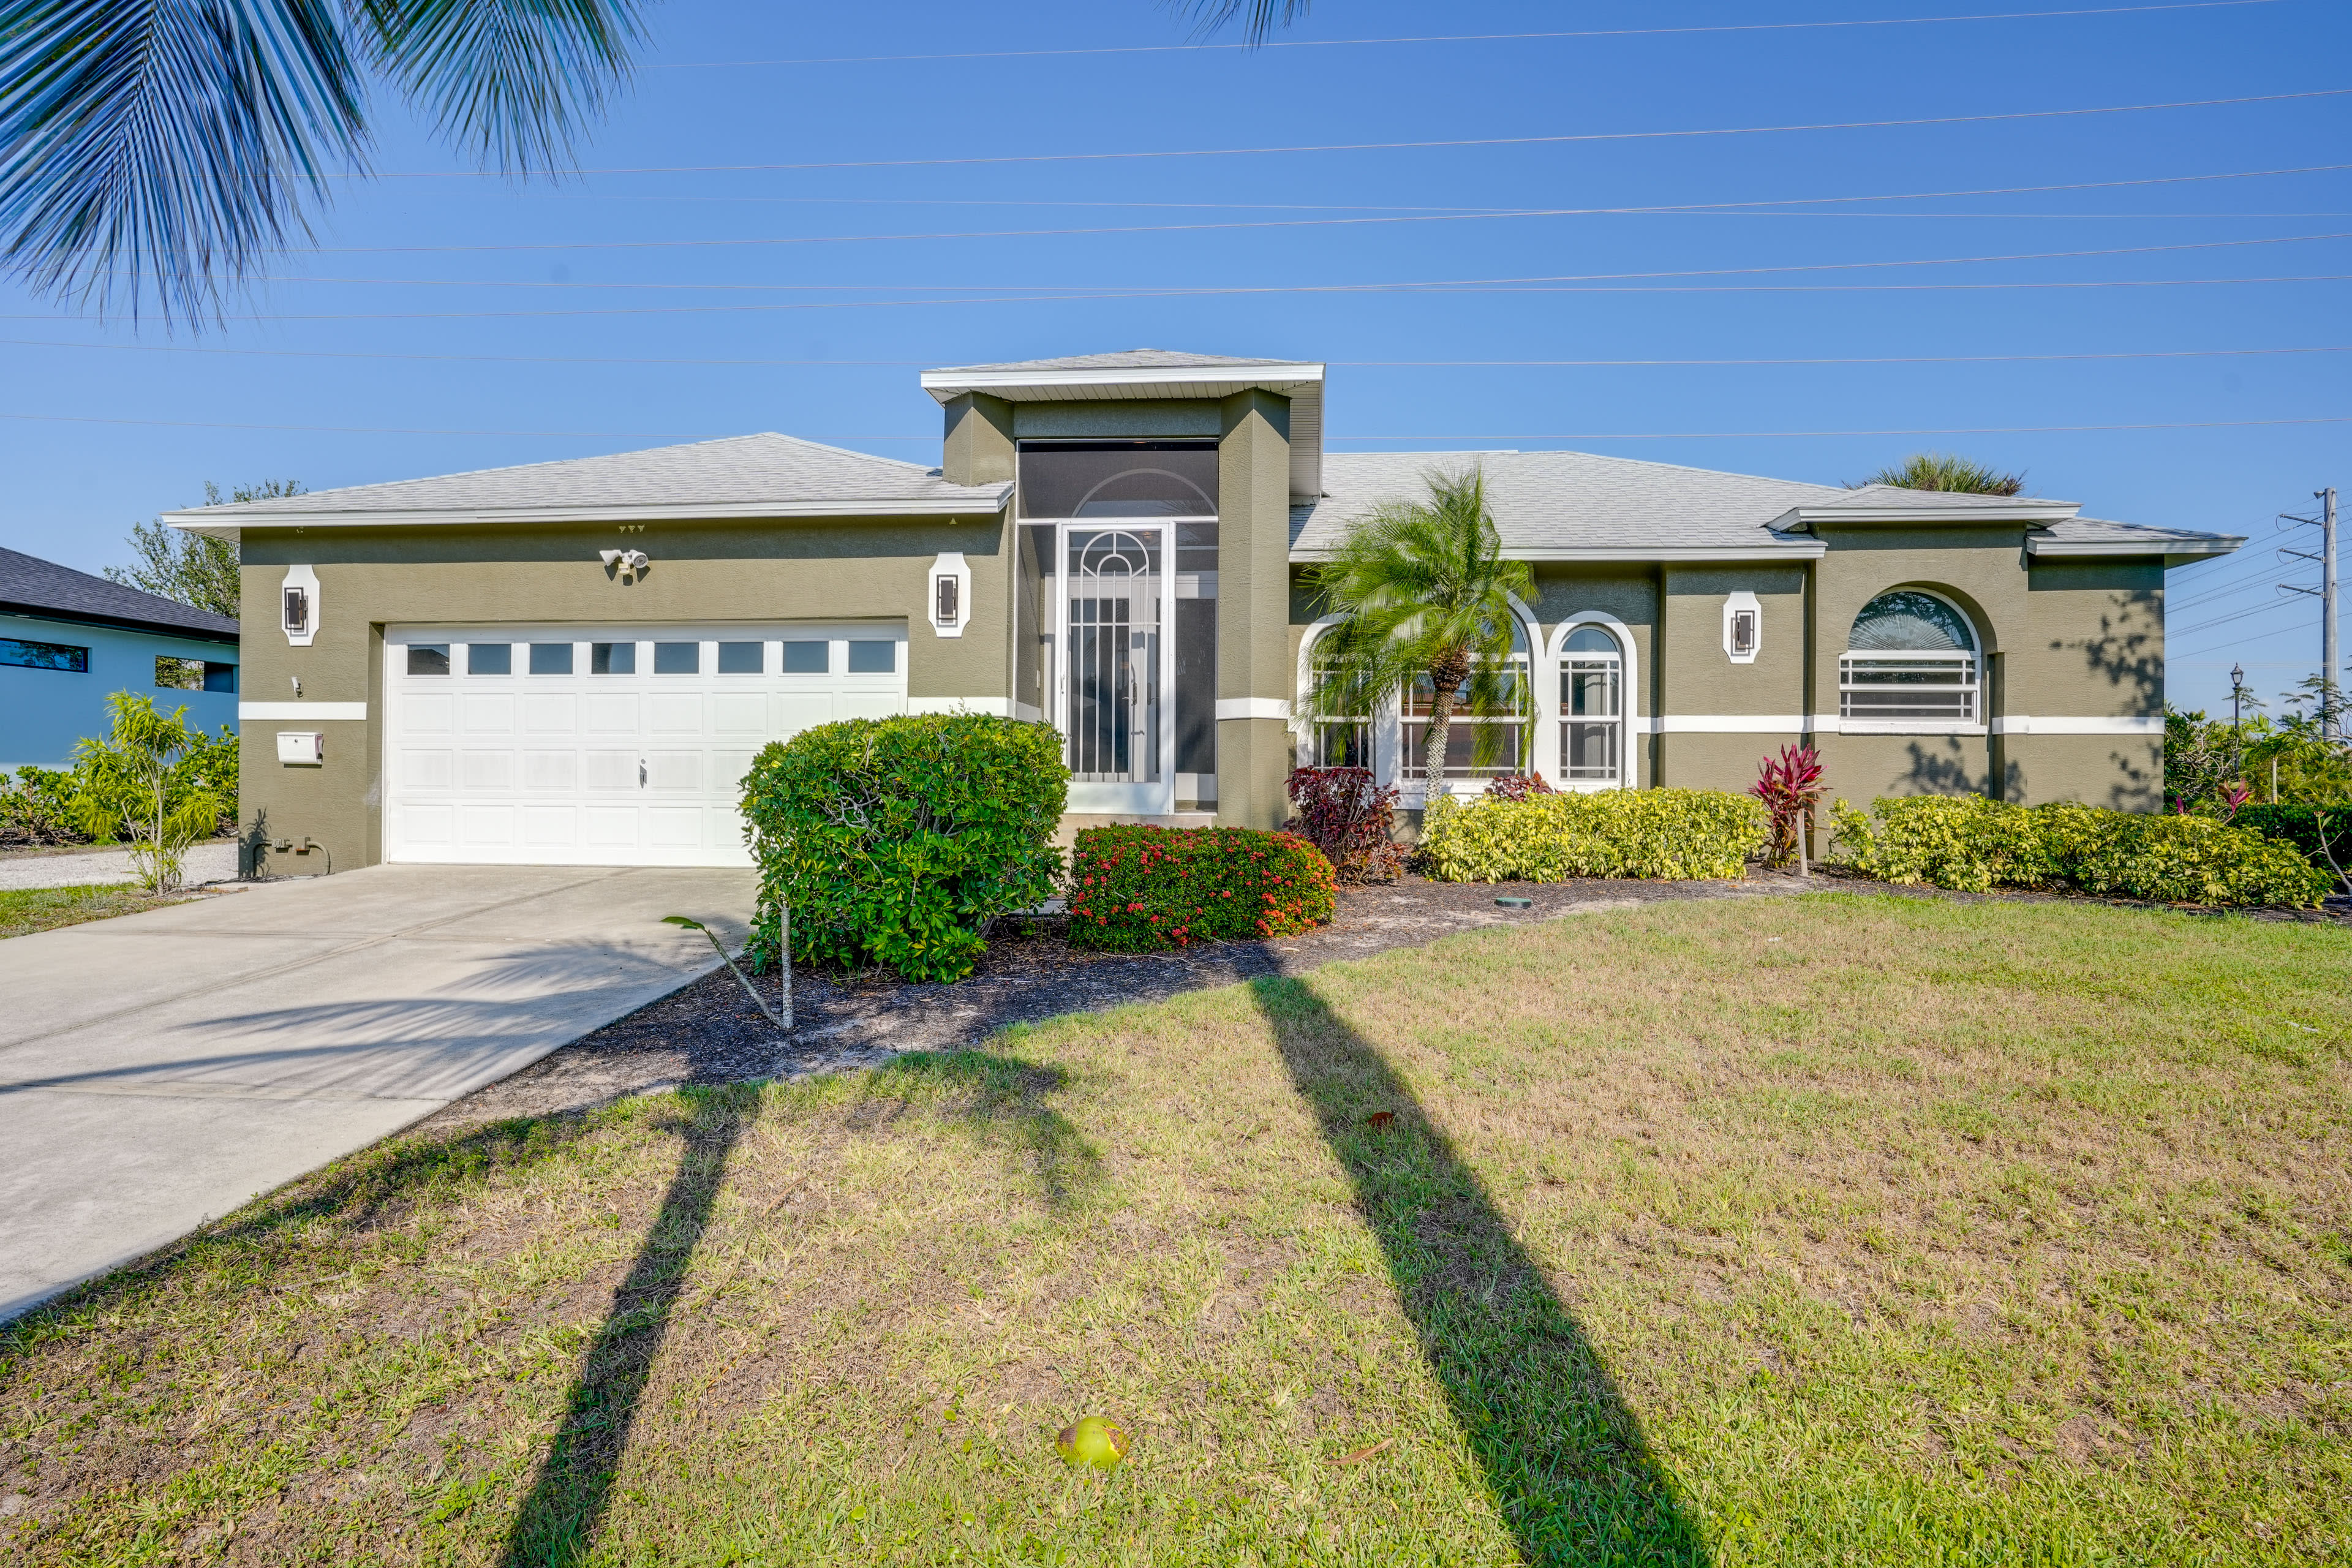 Fort Myers Vacation Rental | 3BR | 2BA | Steps Required for Access | 1,700 Sq Ft